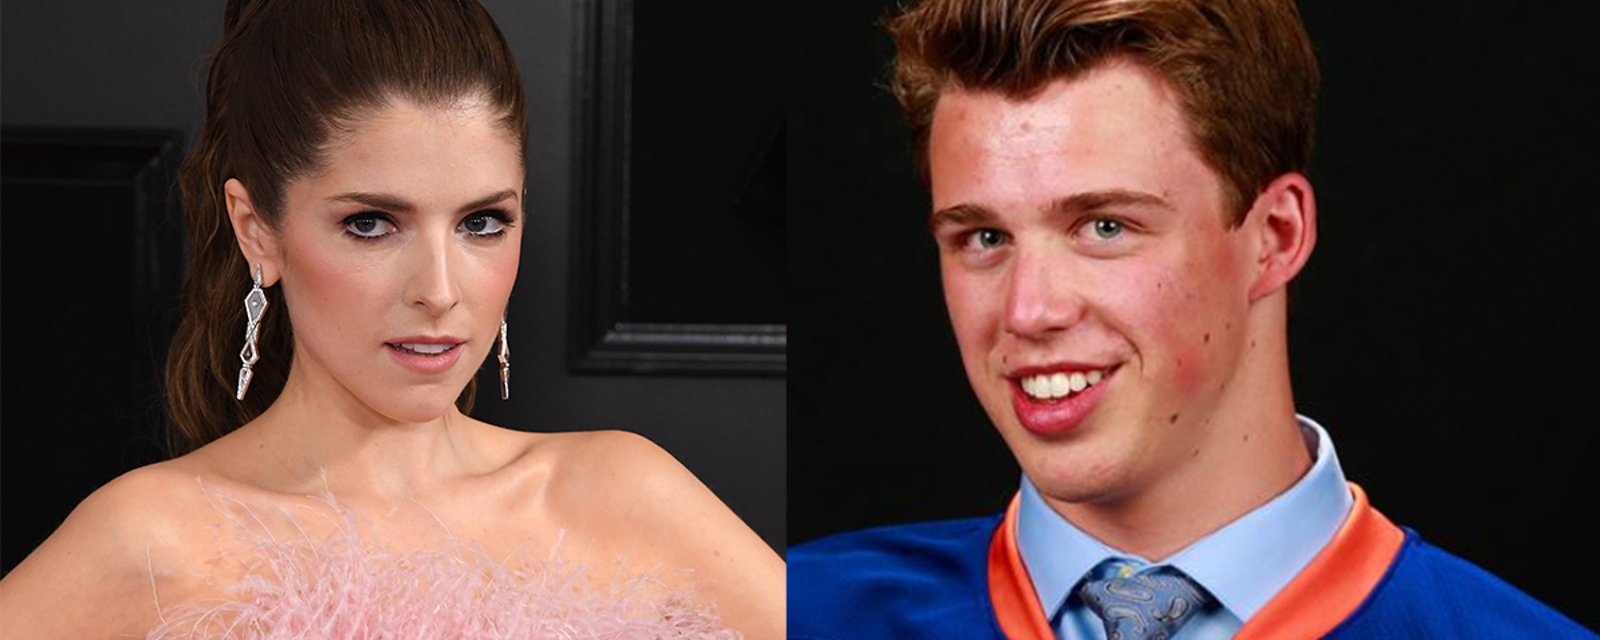 Hawks United Center staff trolls Beauvillier in his quest for Anna Kendrick 